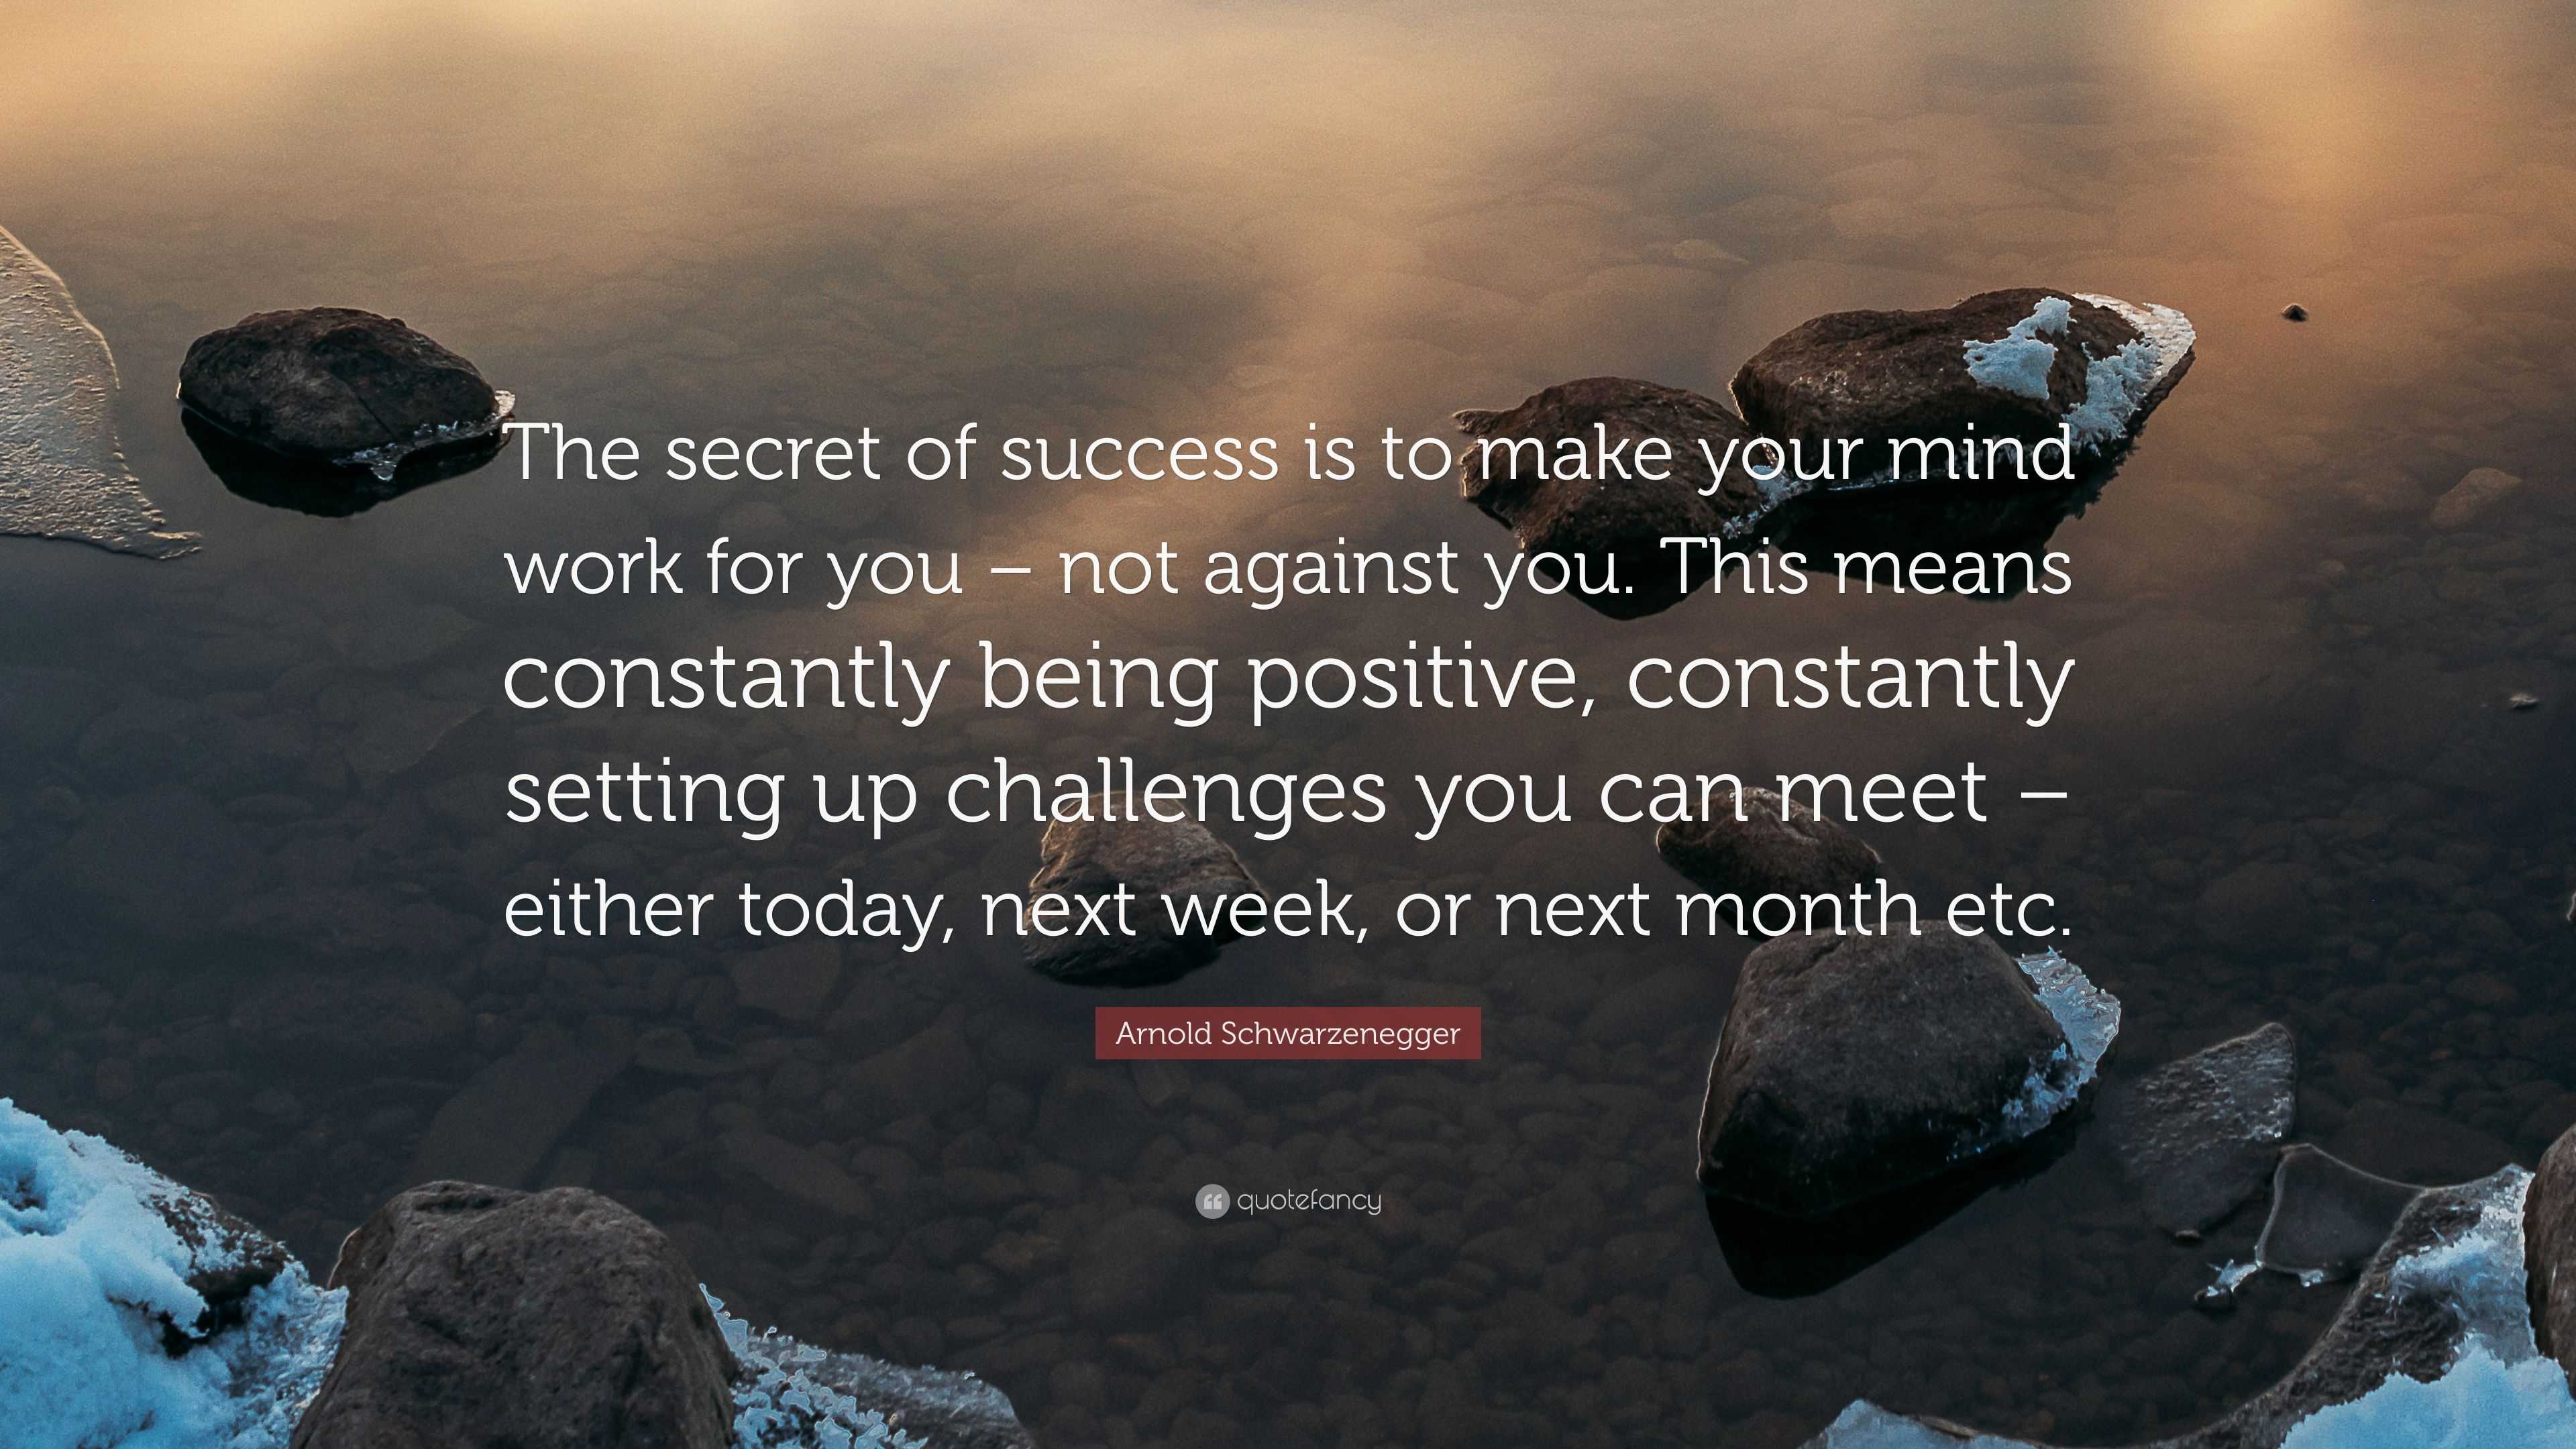 Arnold Schwarzenegger Quote “The secret of success is to make your